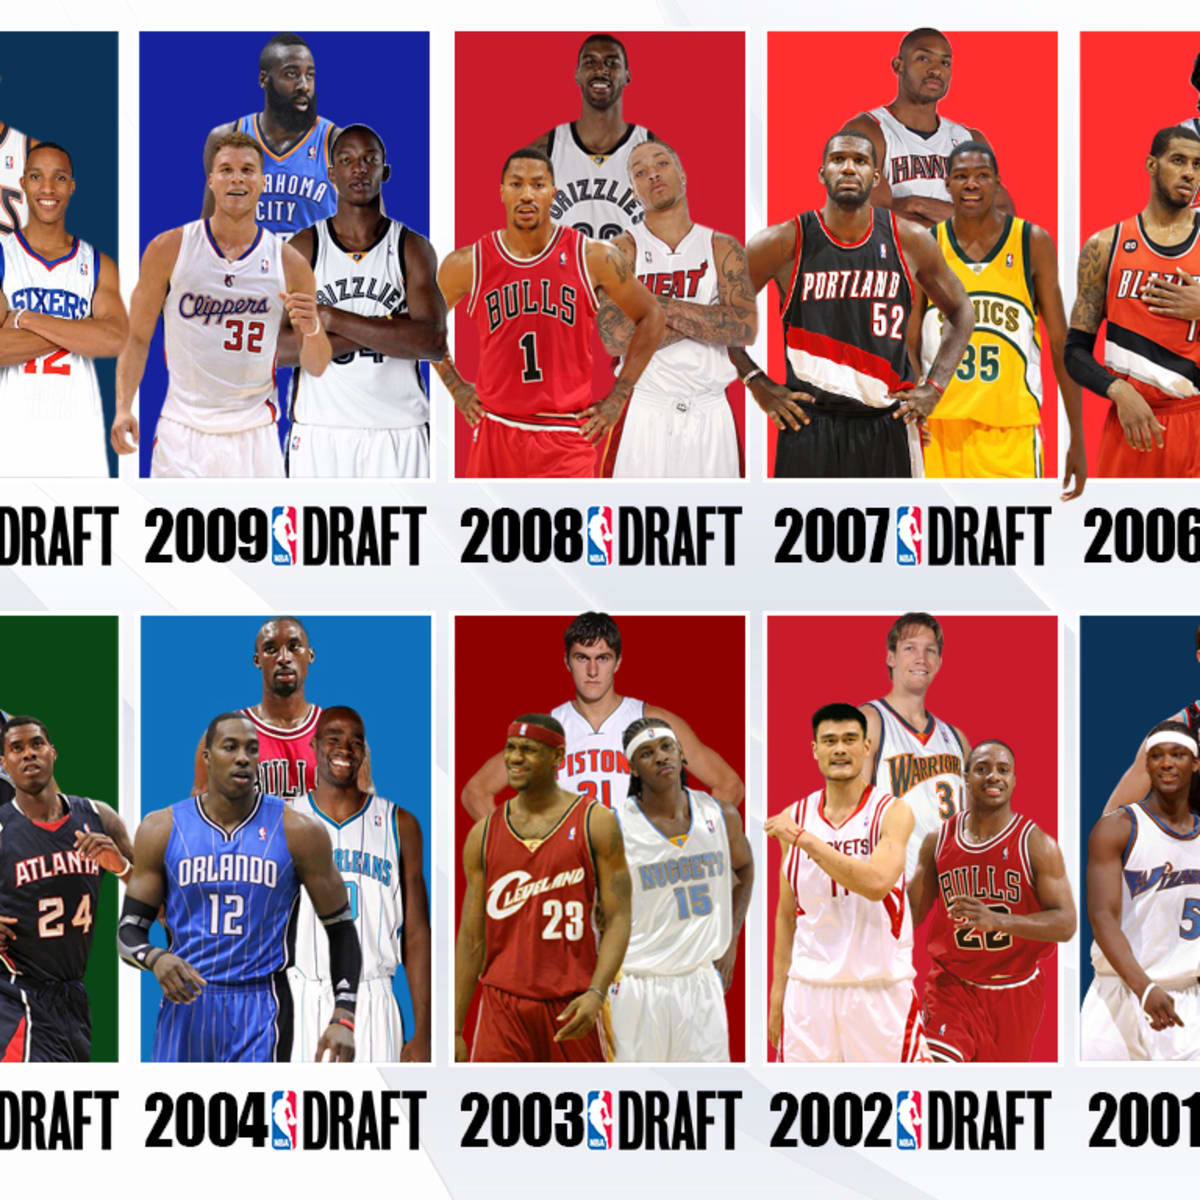 What If LeBron James Was Drafted in 2002? (Part 1)